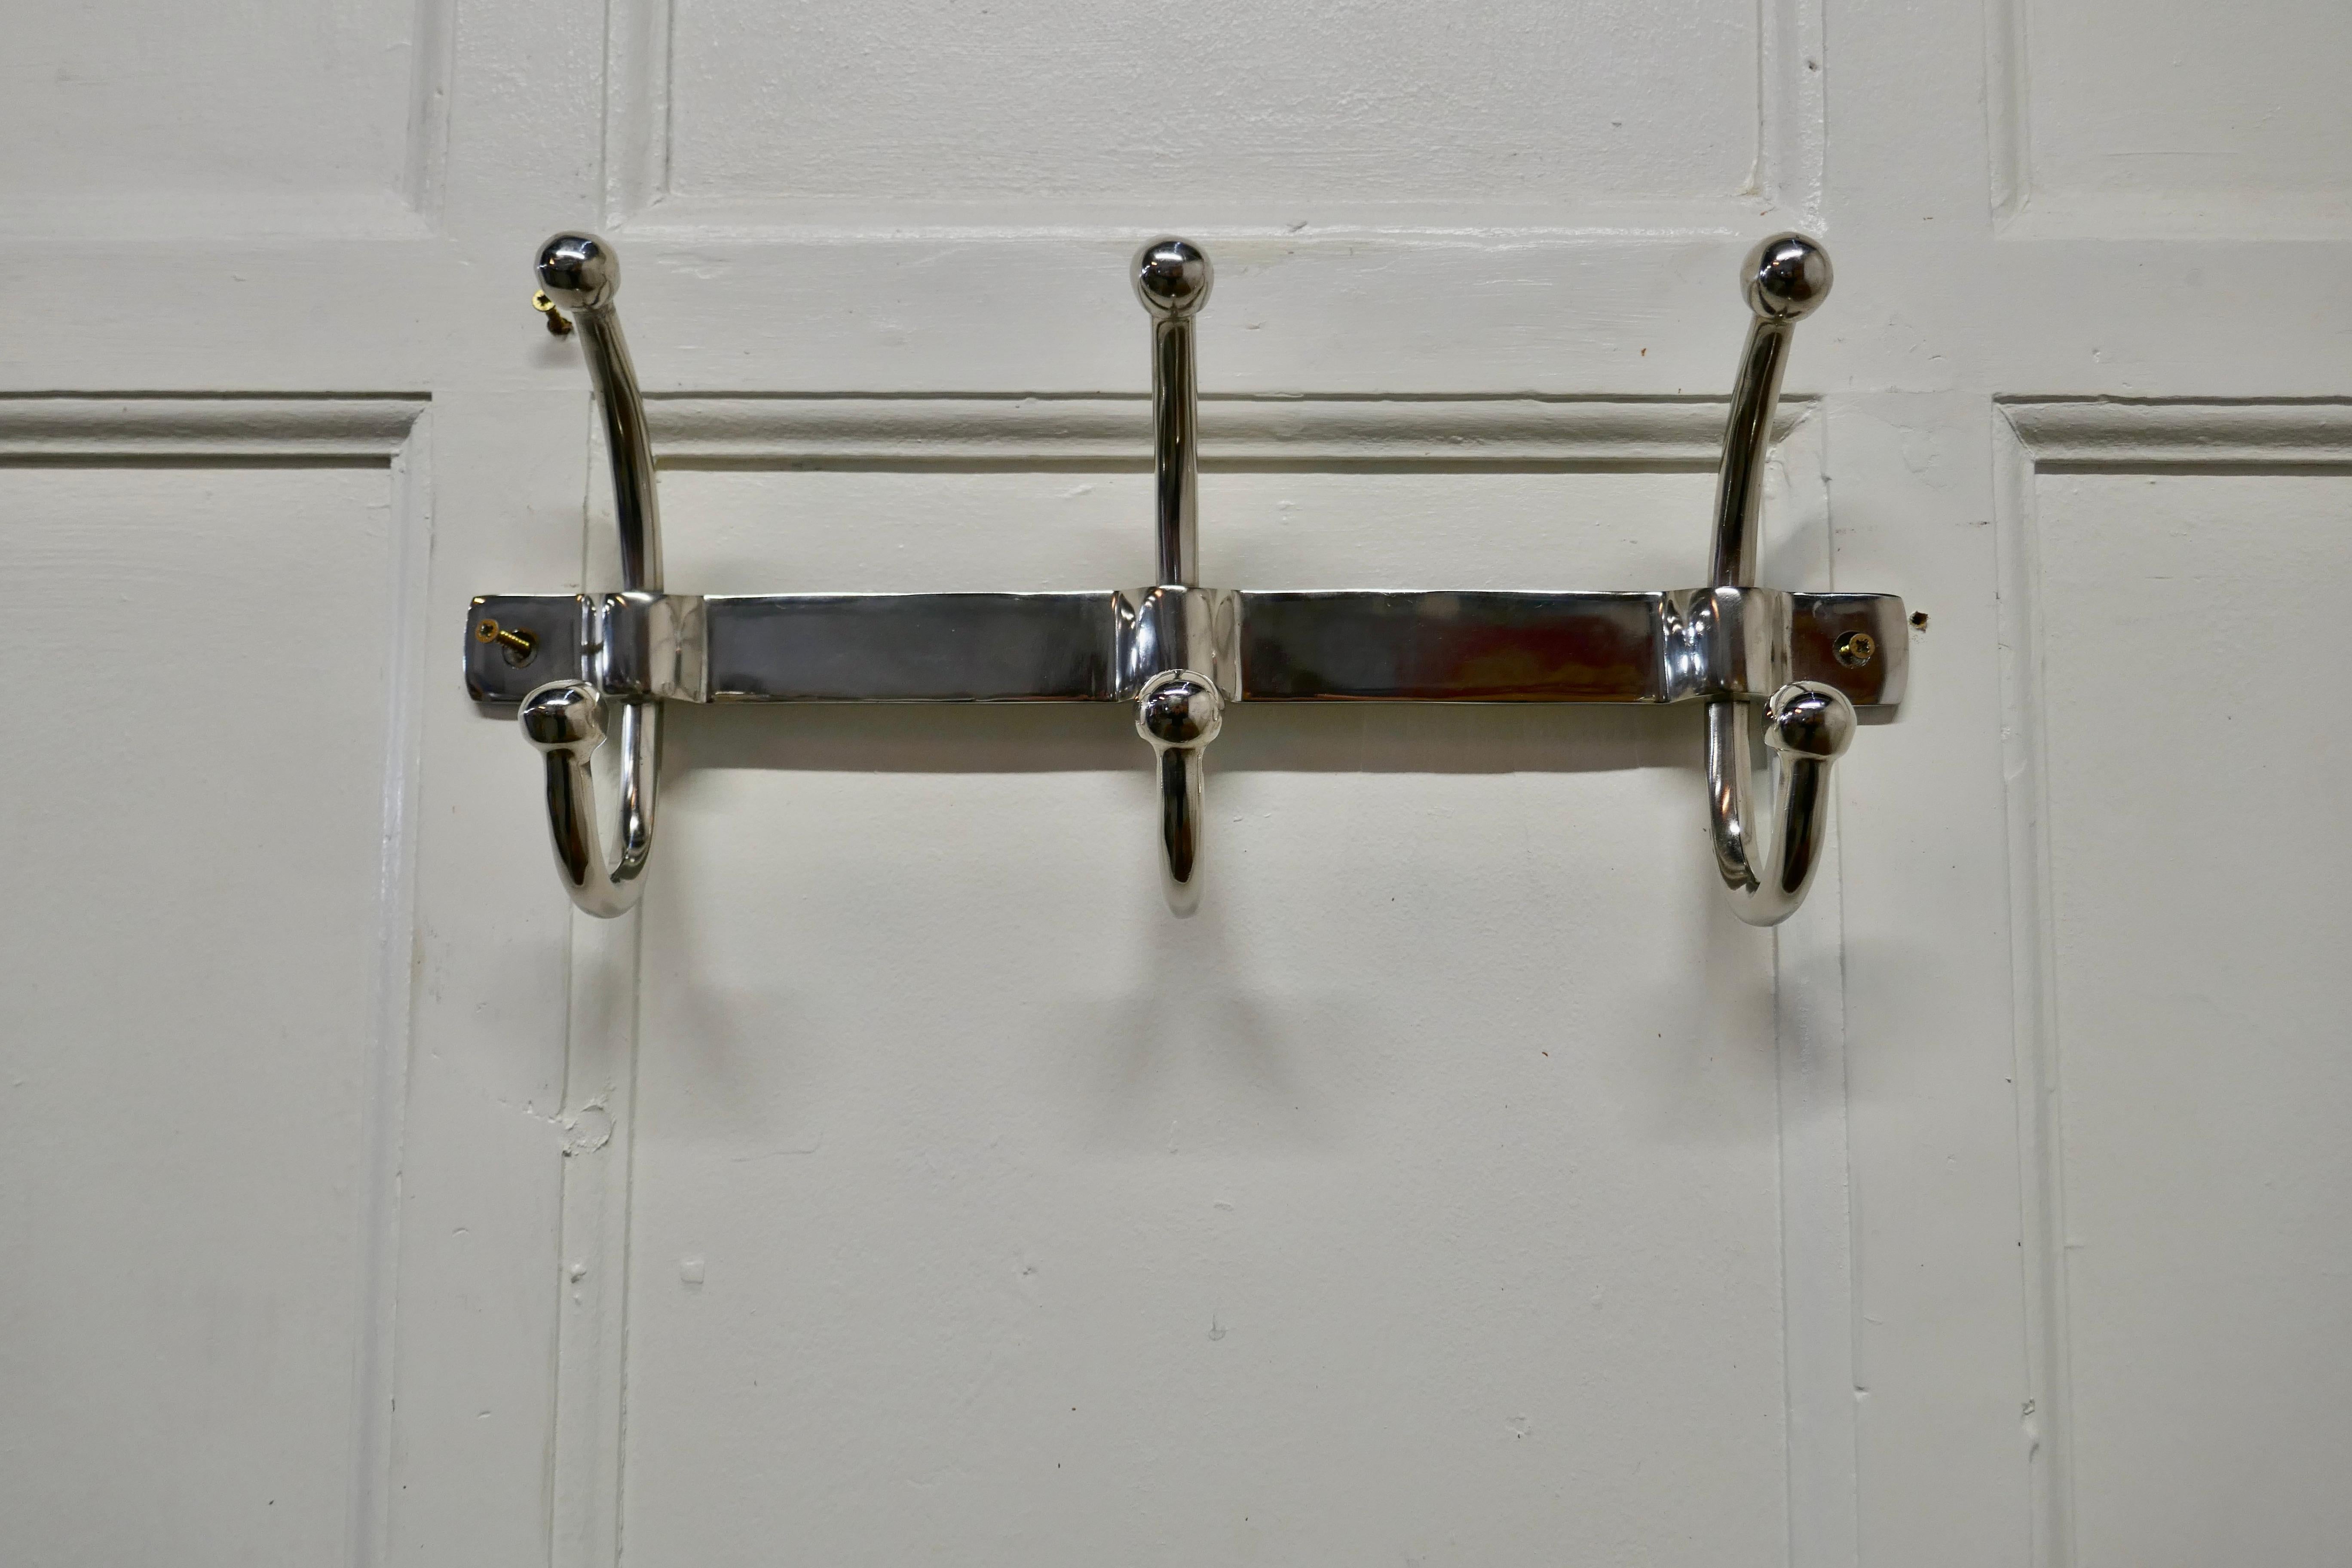 Very stylish chrome cloakroom coat rack

The rack has 3 double swan neck hooks
The bracket is 9” tall, 17” long and stands out 4” from the wall 
NV326.